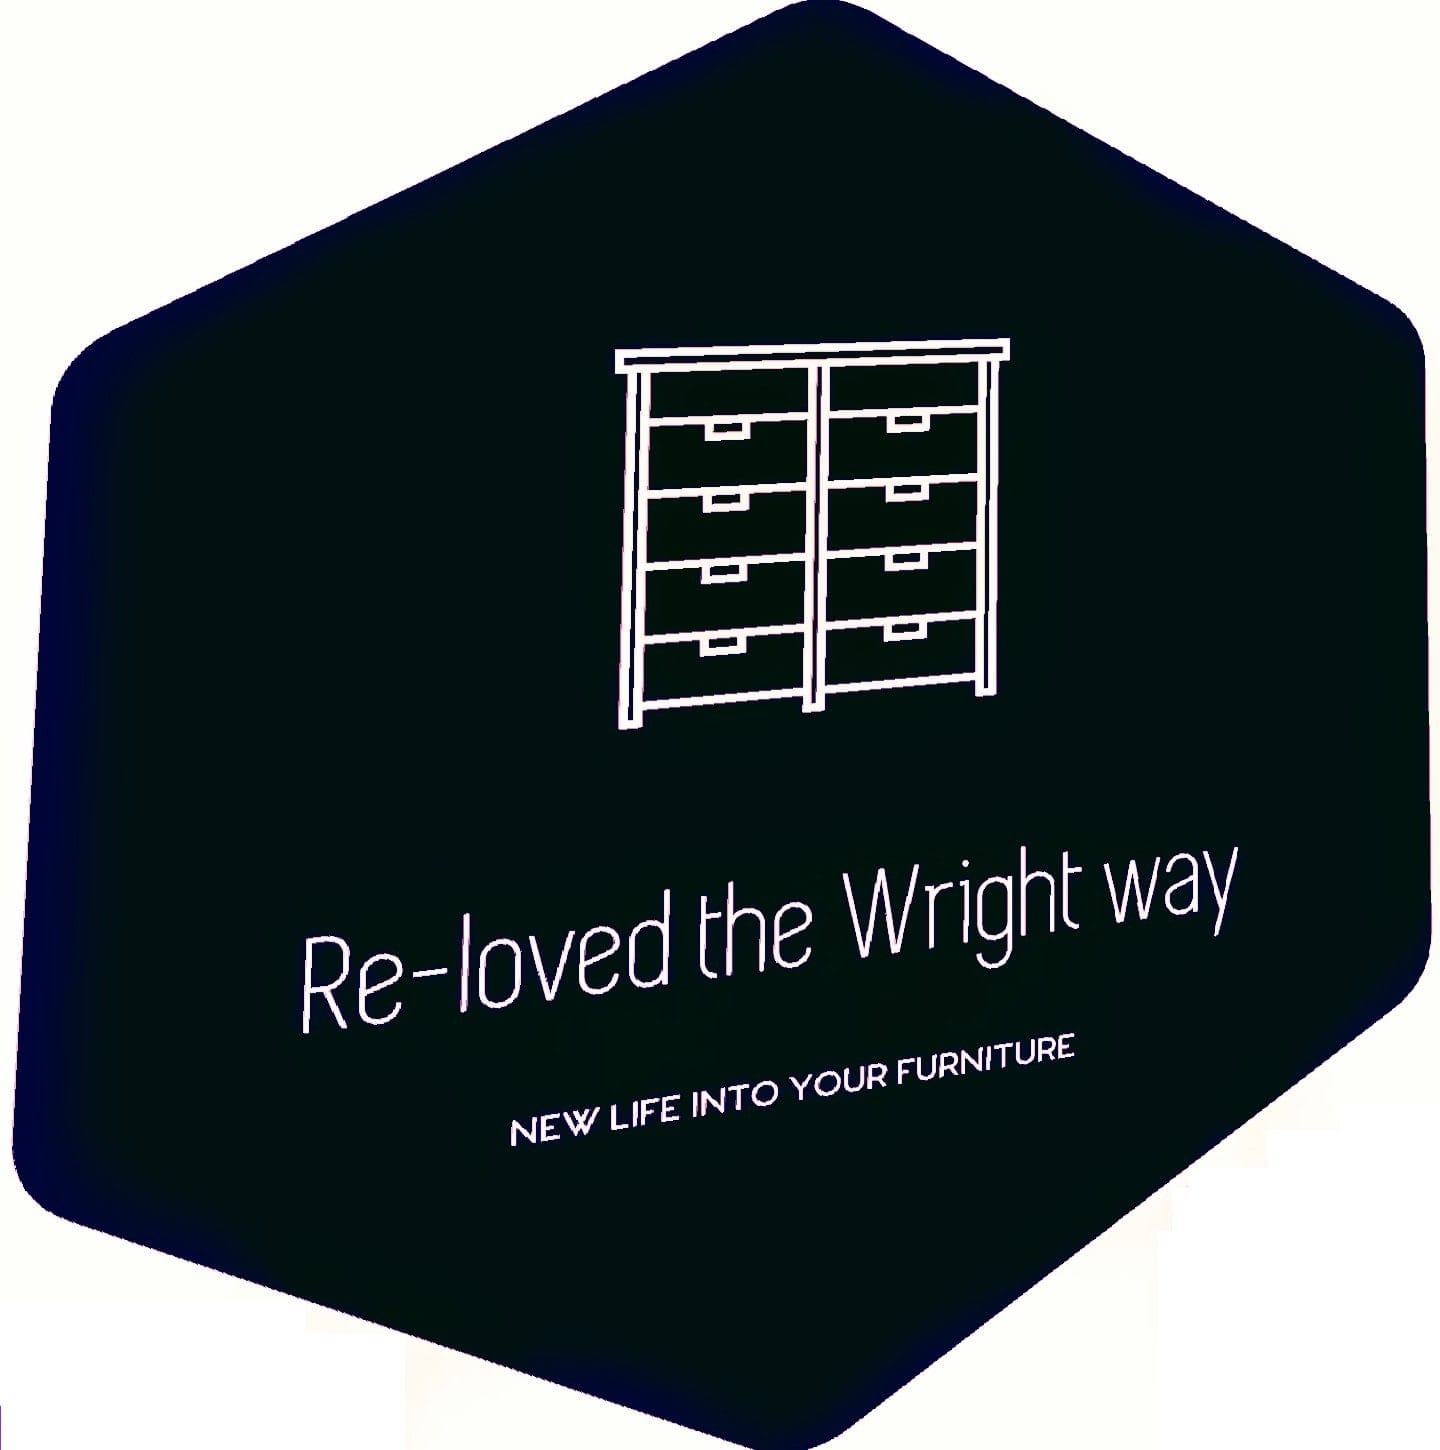 Reloved the Wrightway